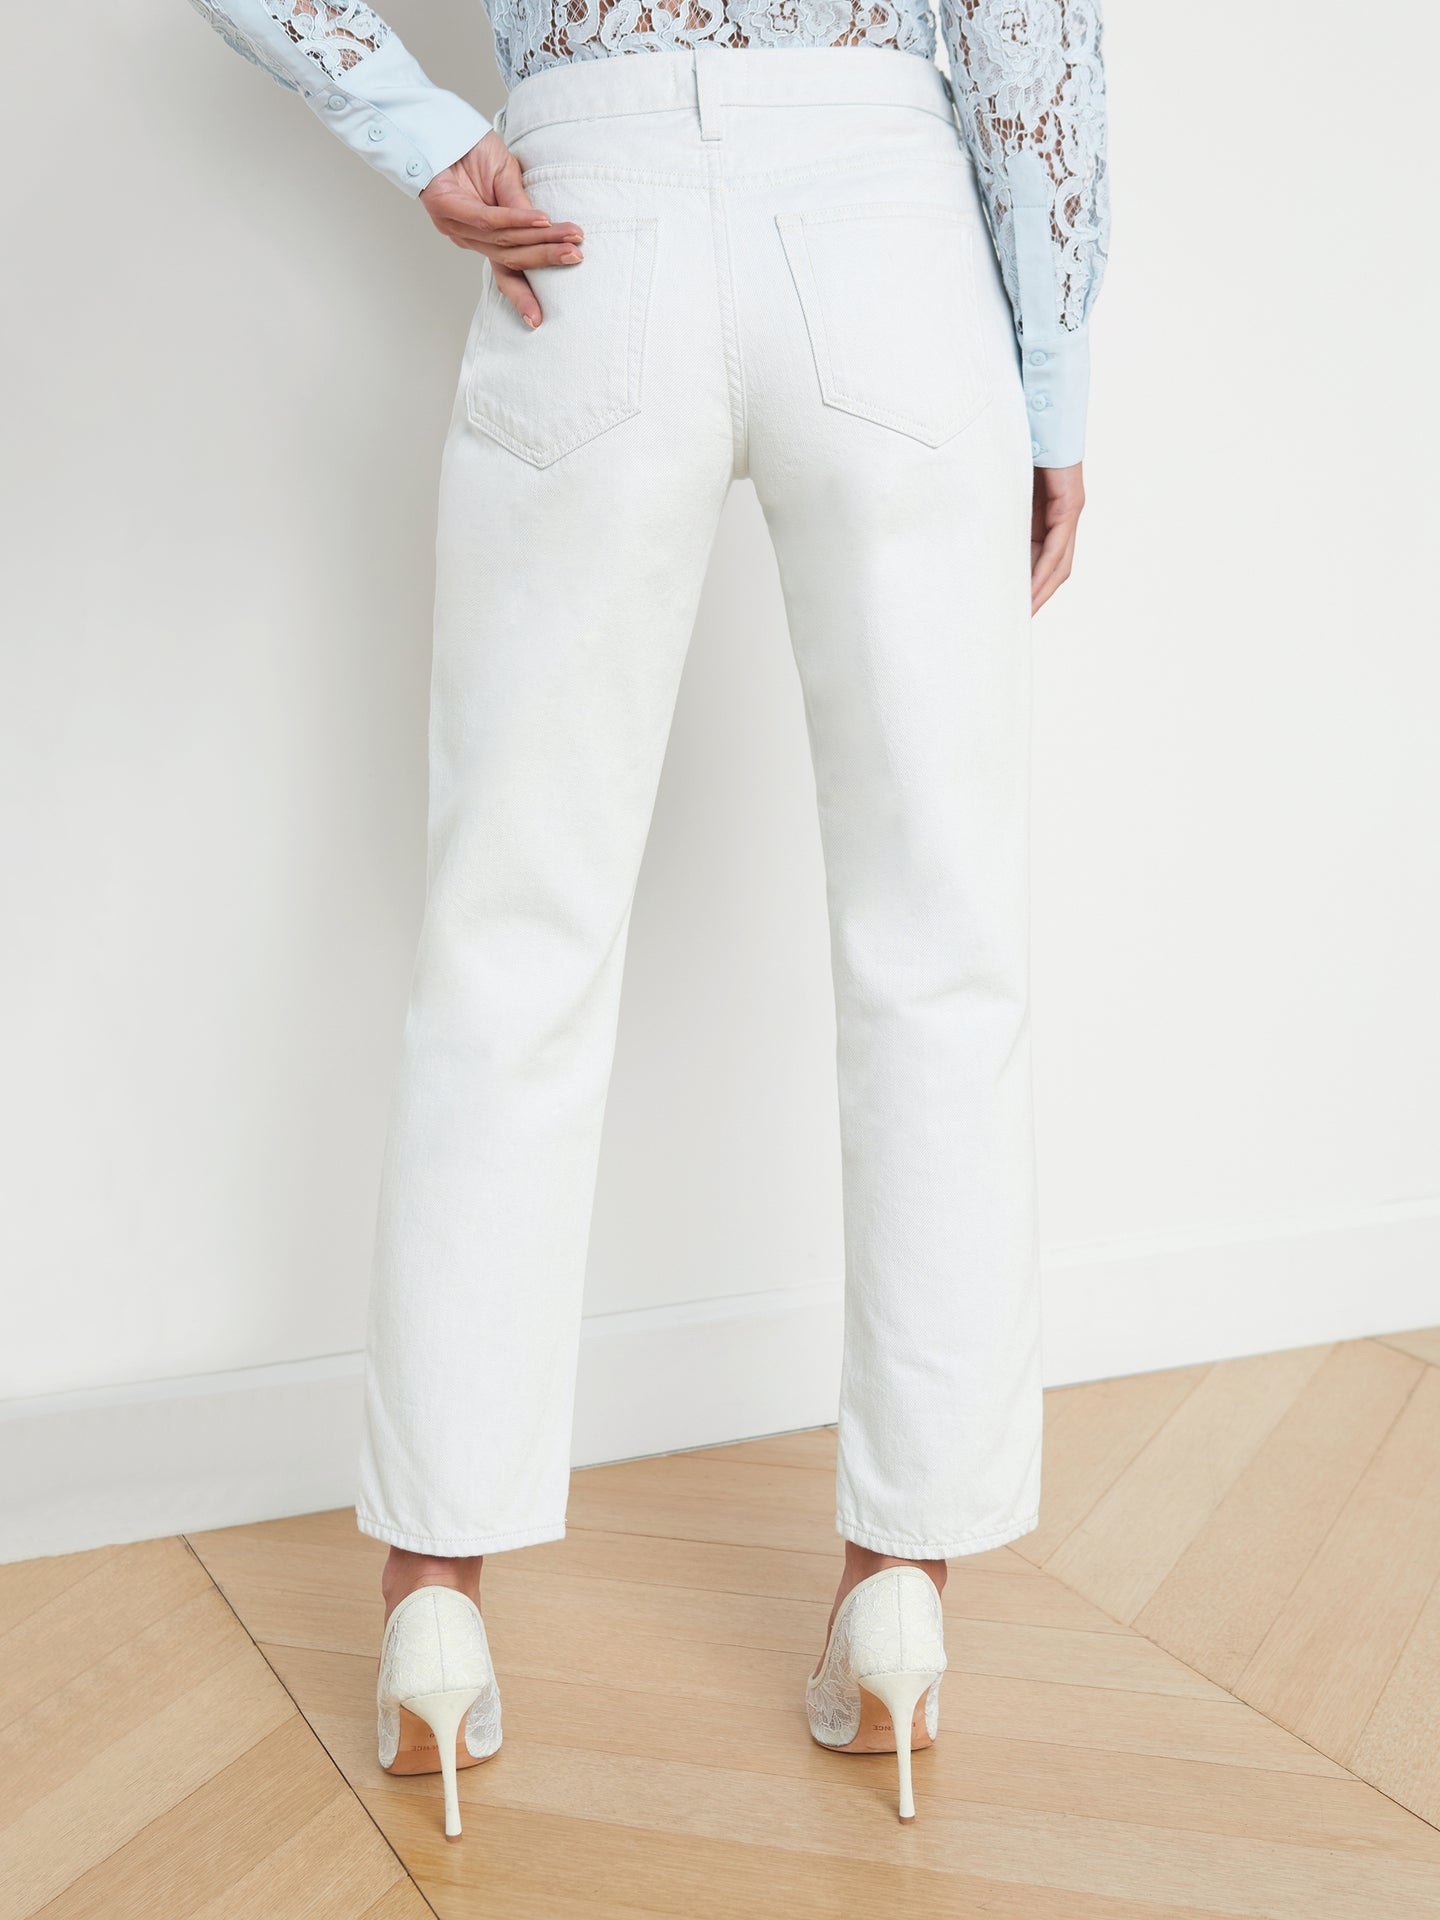 Lagence Mateo Mr Slouchy Straight Pant